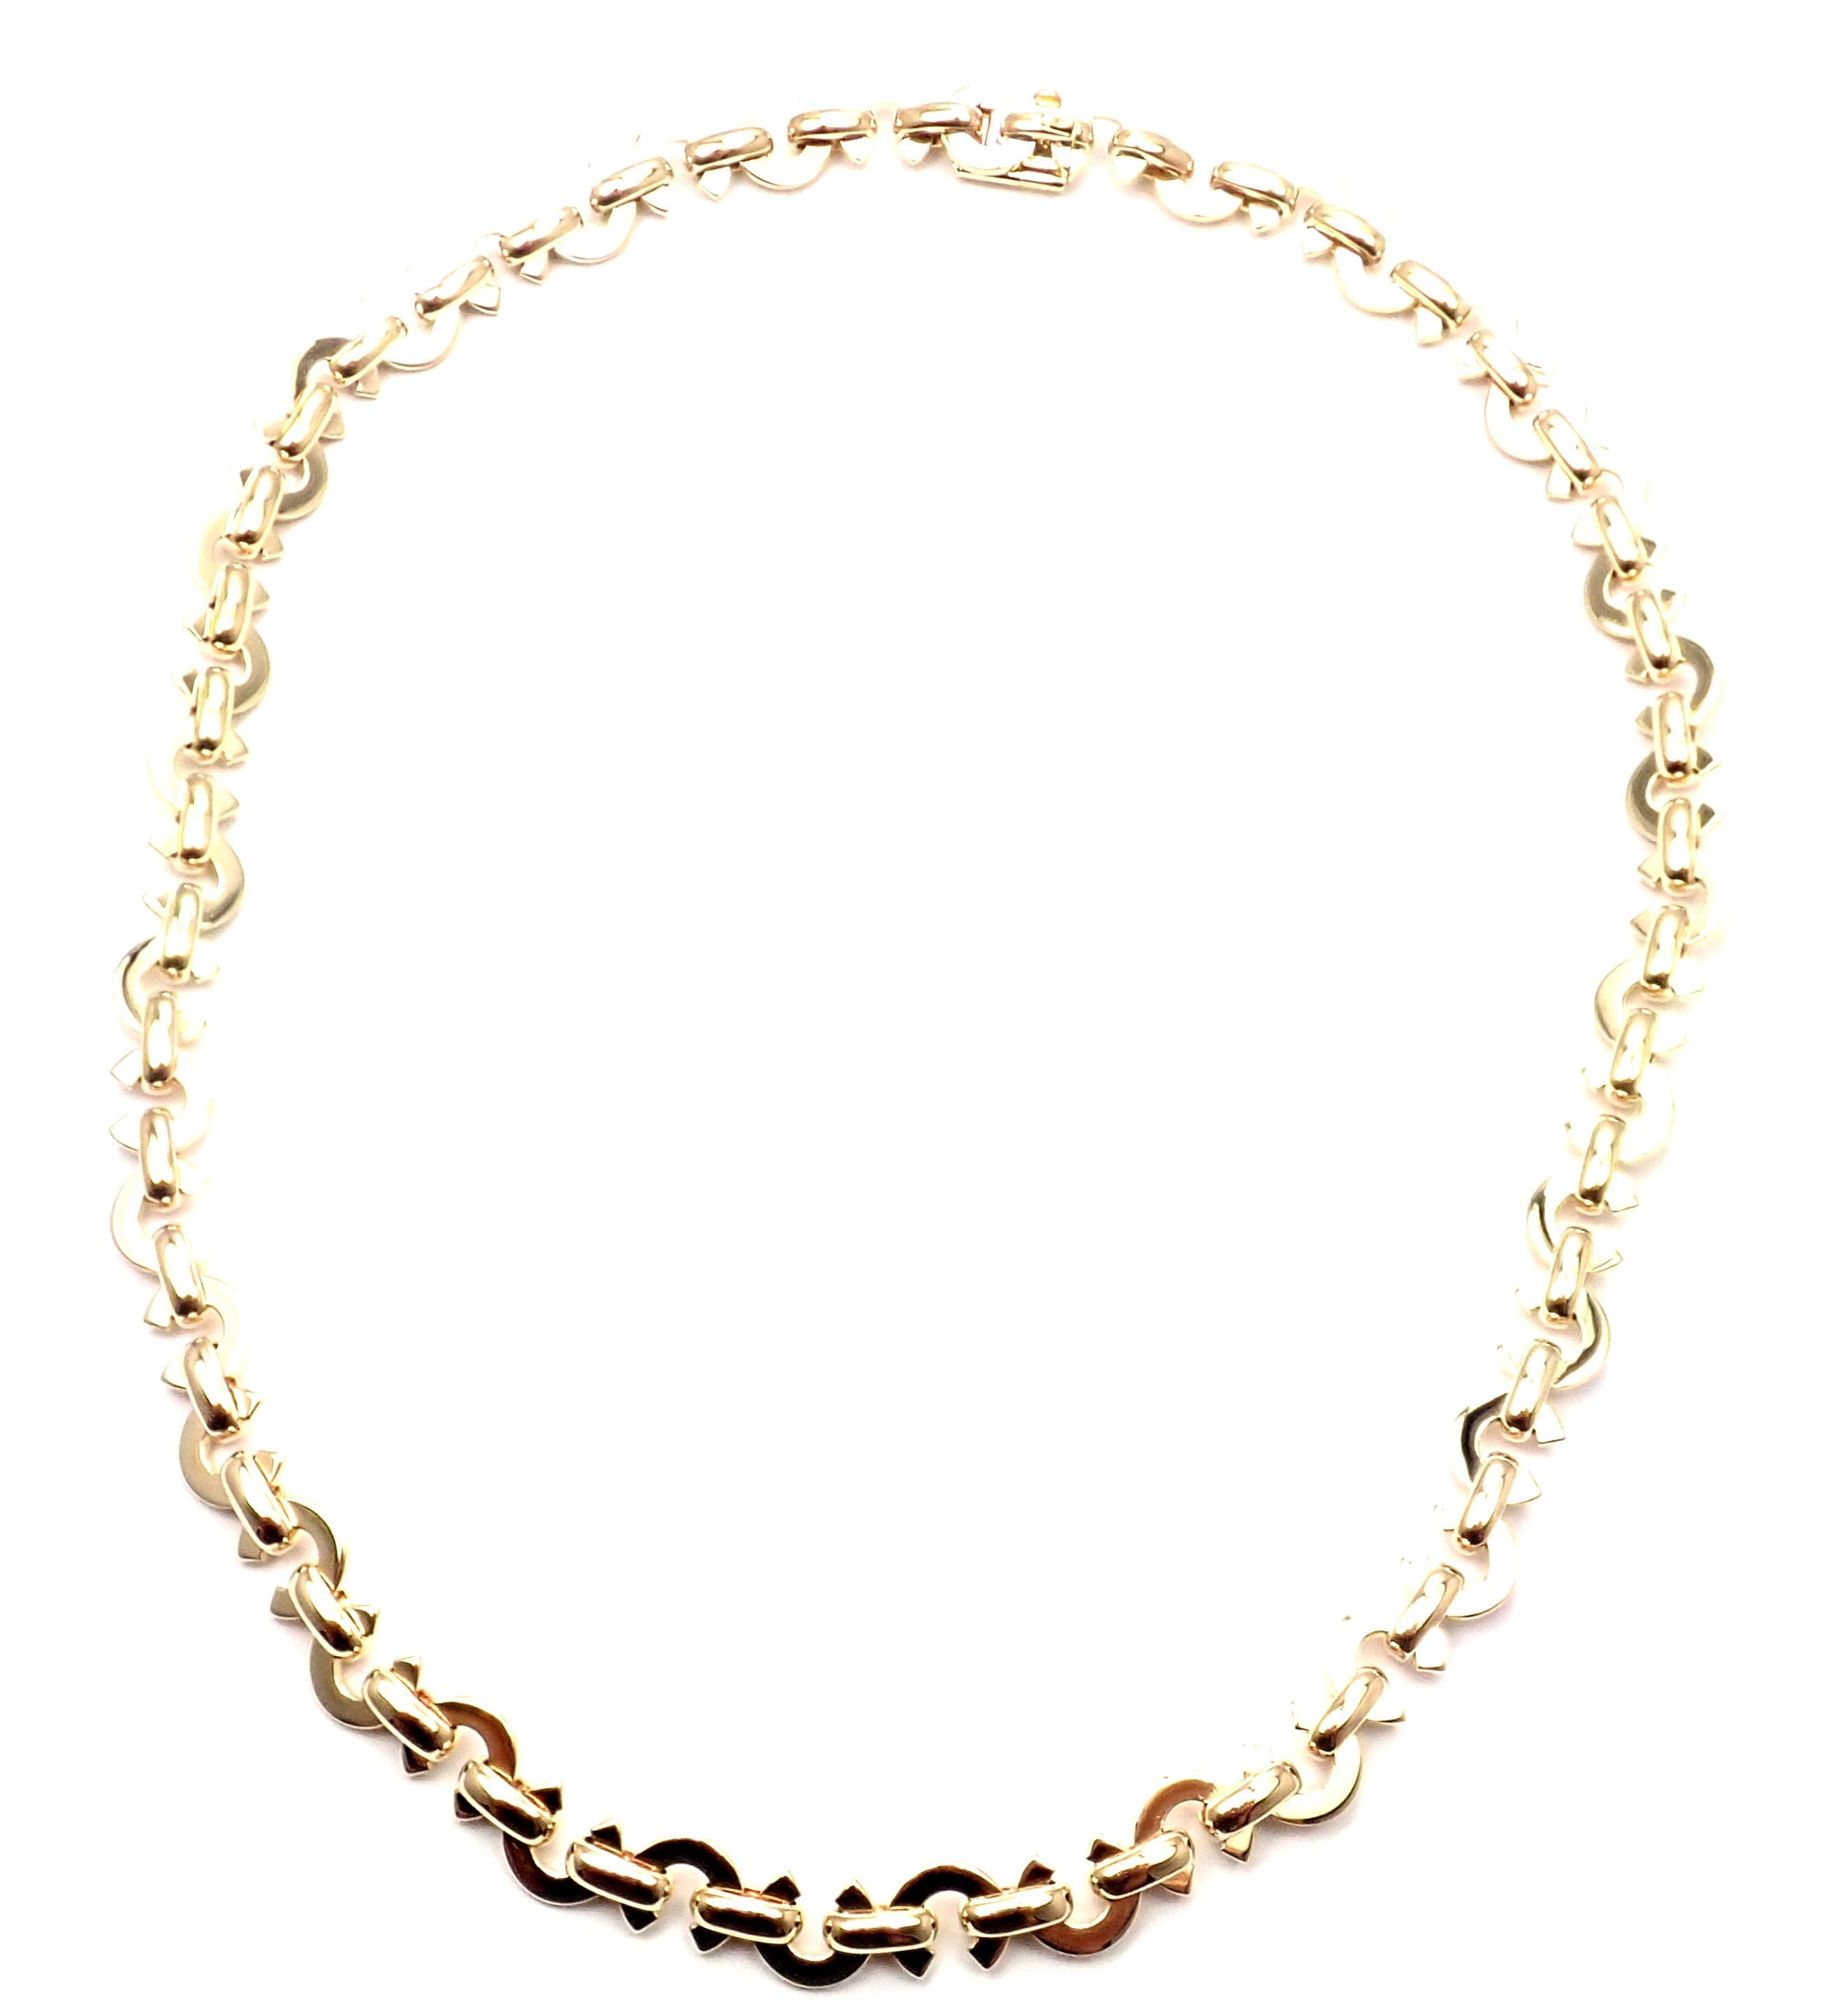 18k Yellow Gold Coco Logo Link Chain Necklace by Chanel
Details: 
Length:  15.5